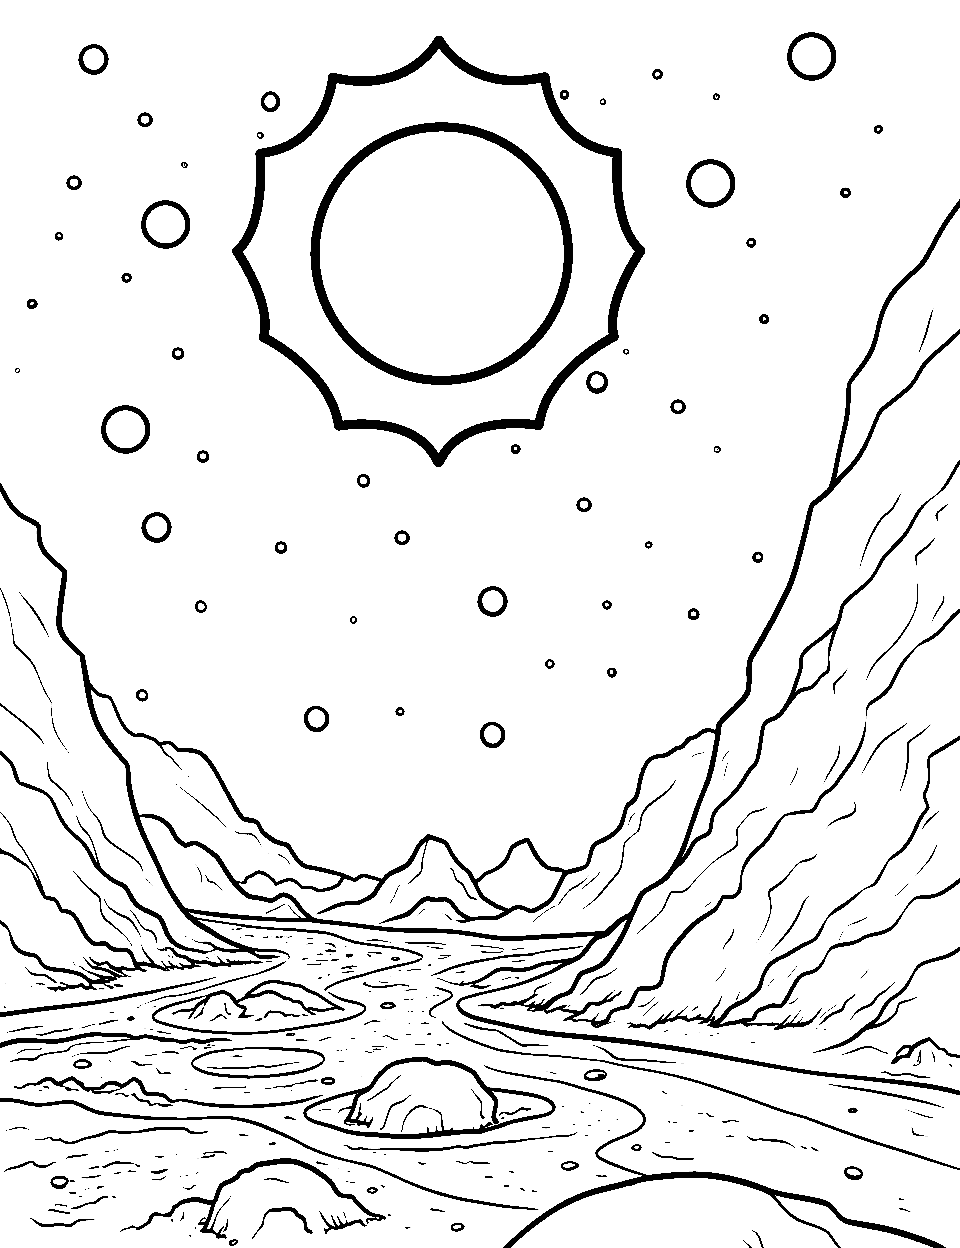 Mercury's Hot Surface Coloring Page - The rocky terrain of Mercury with sun rays glaring down.